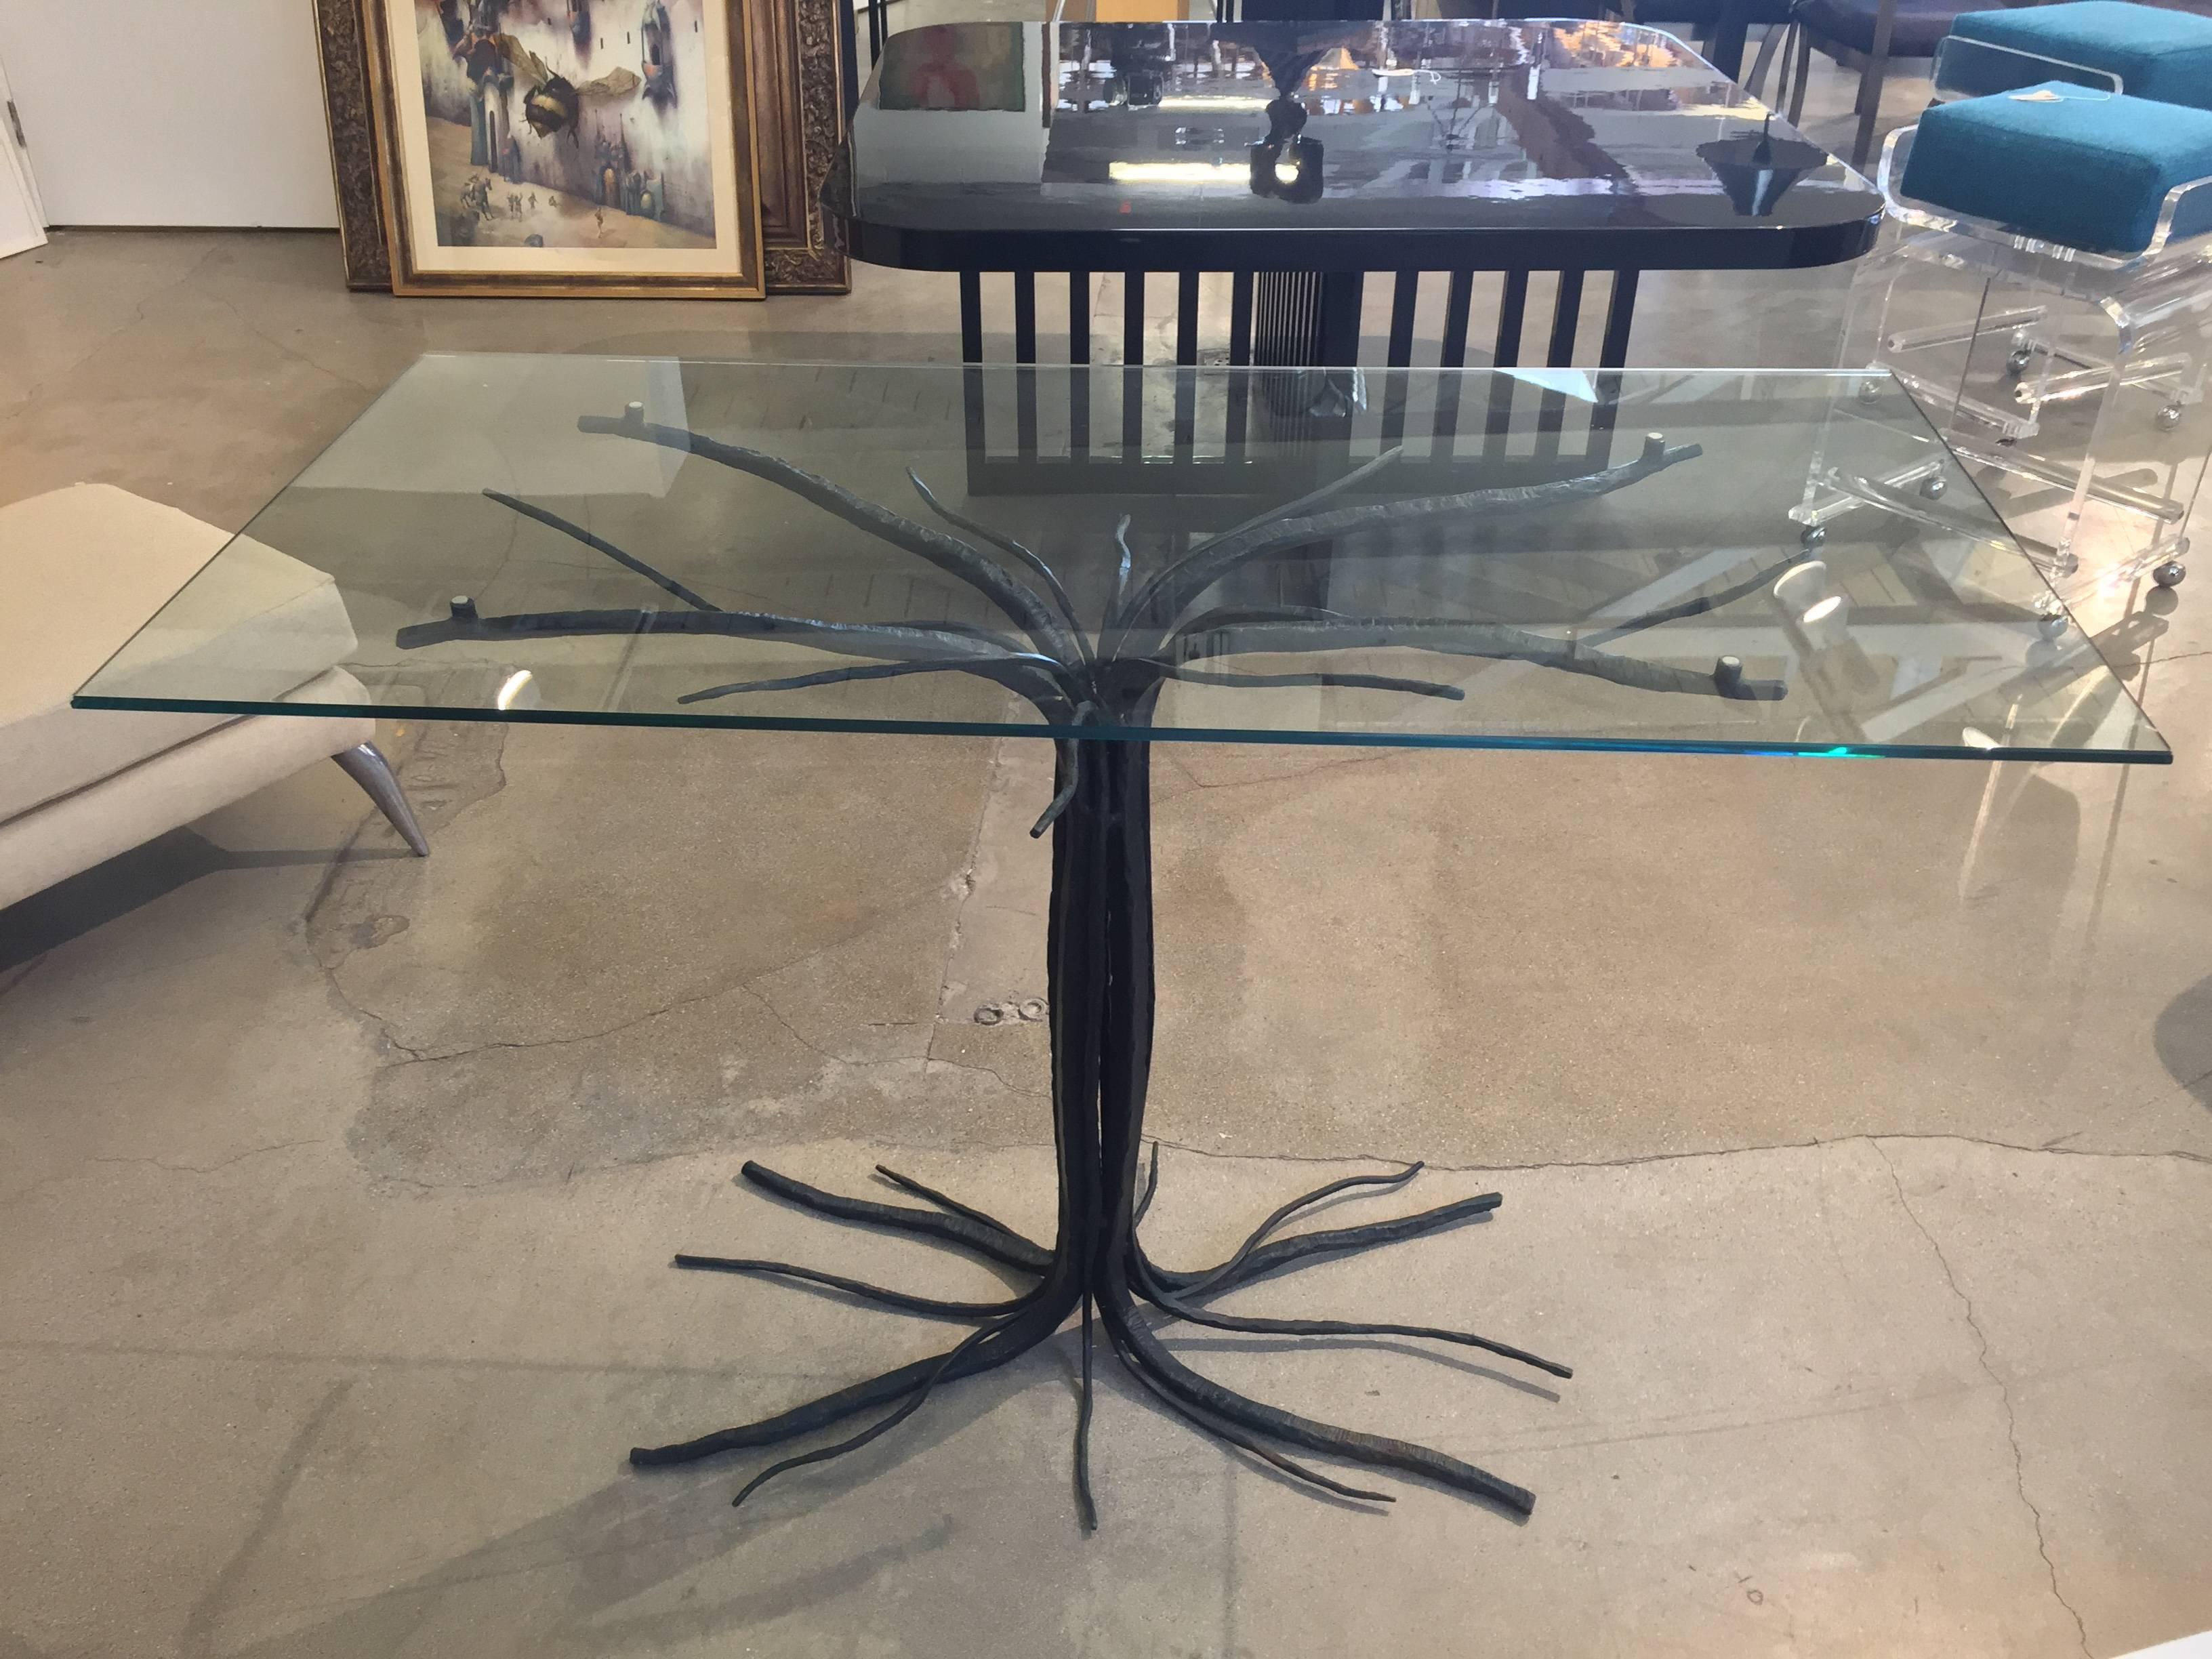 A great looking iron twig or branch table with a glass top. A very elegant design.